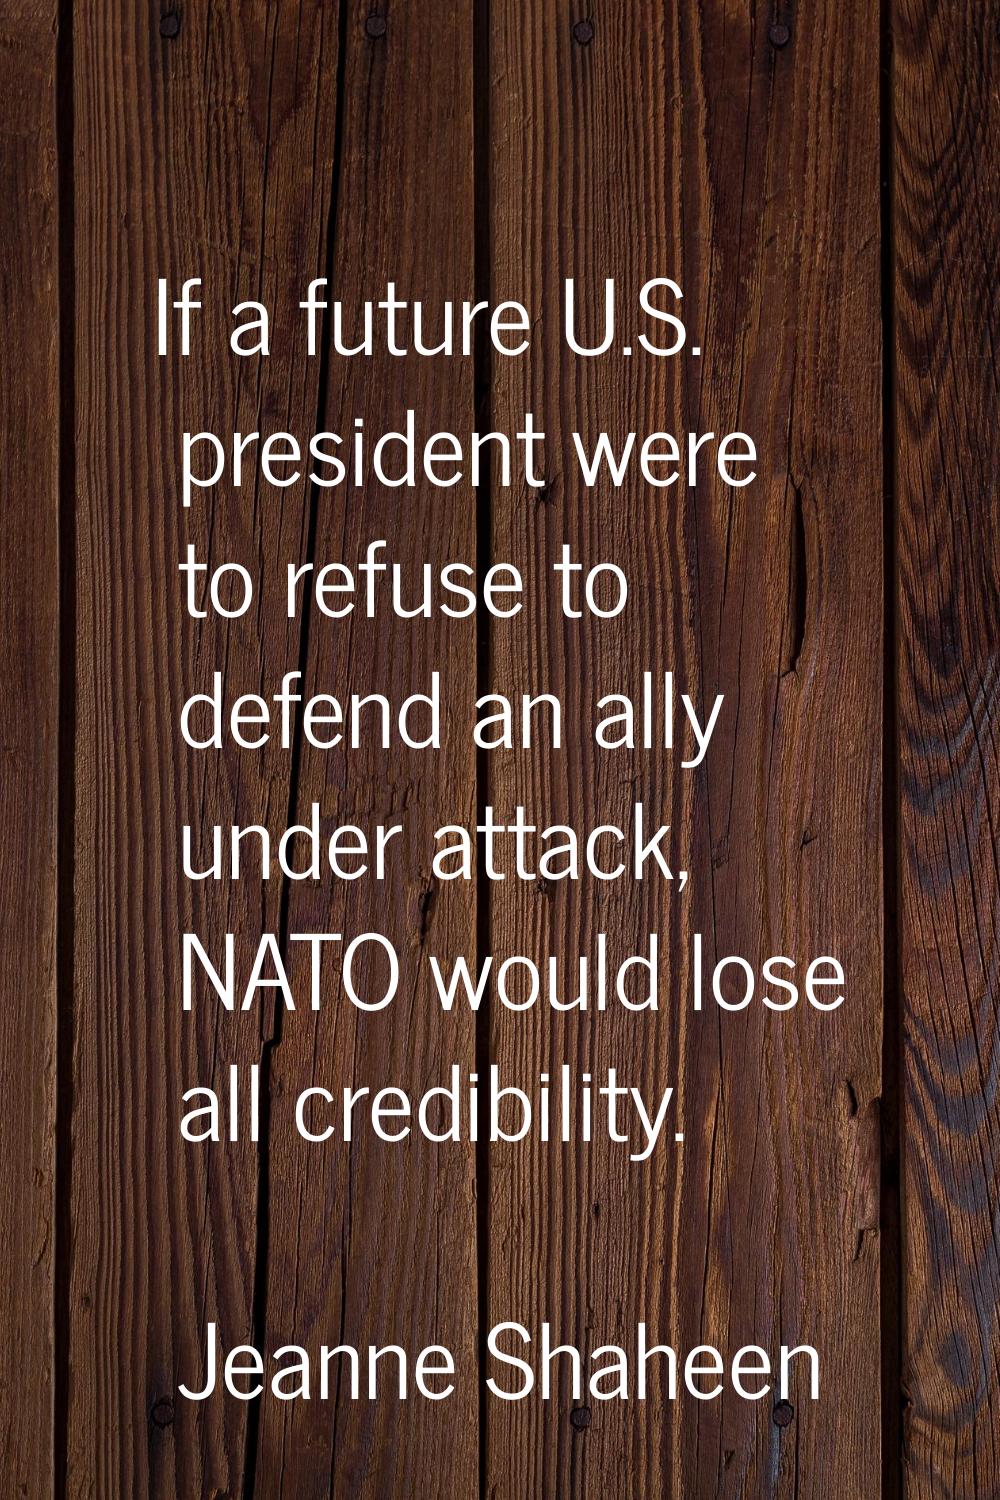 If a future U.S. president were to refuse to defend an ally under attack, NATO would lose all credi